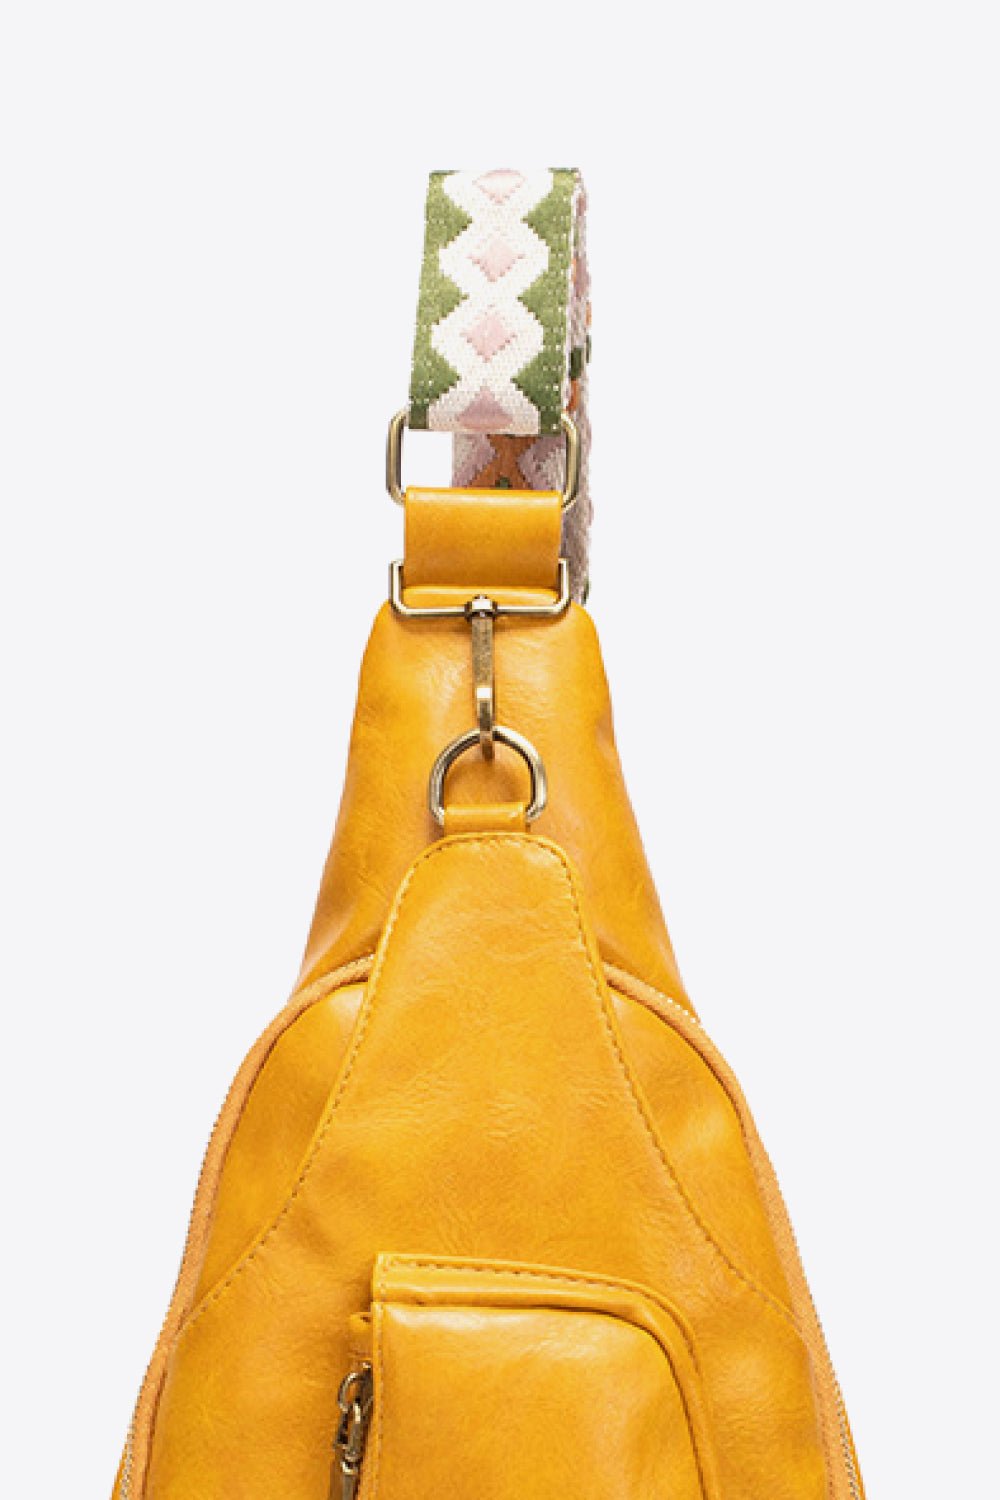 All The Feels PU Leather Sling Bag - PINKCOLADA-Bags-100100000882901